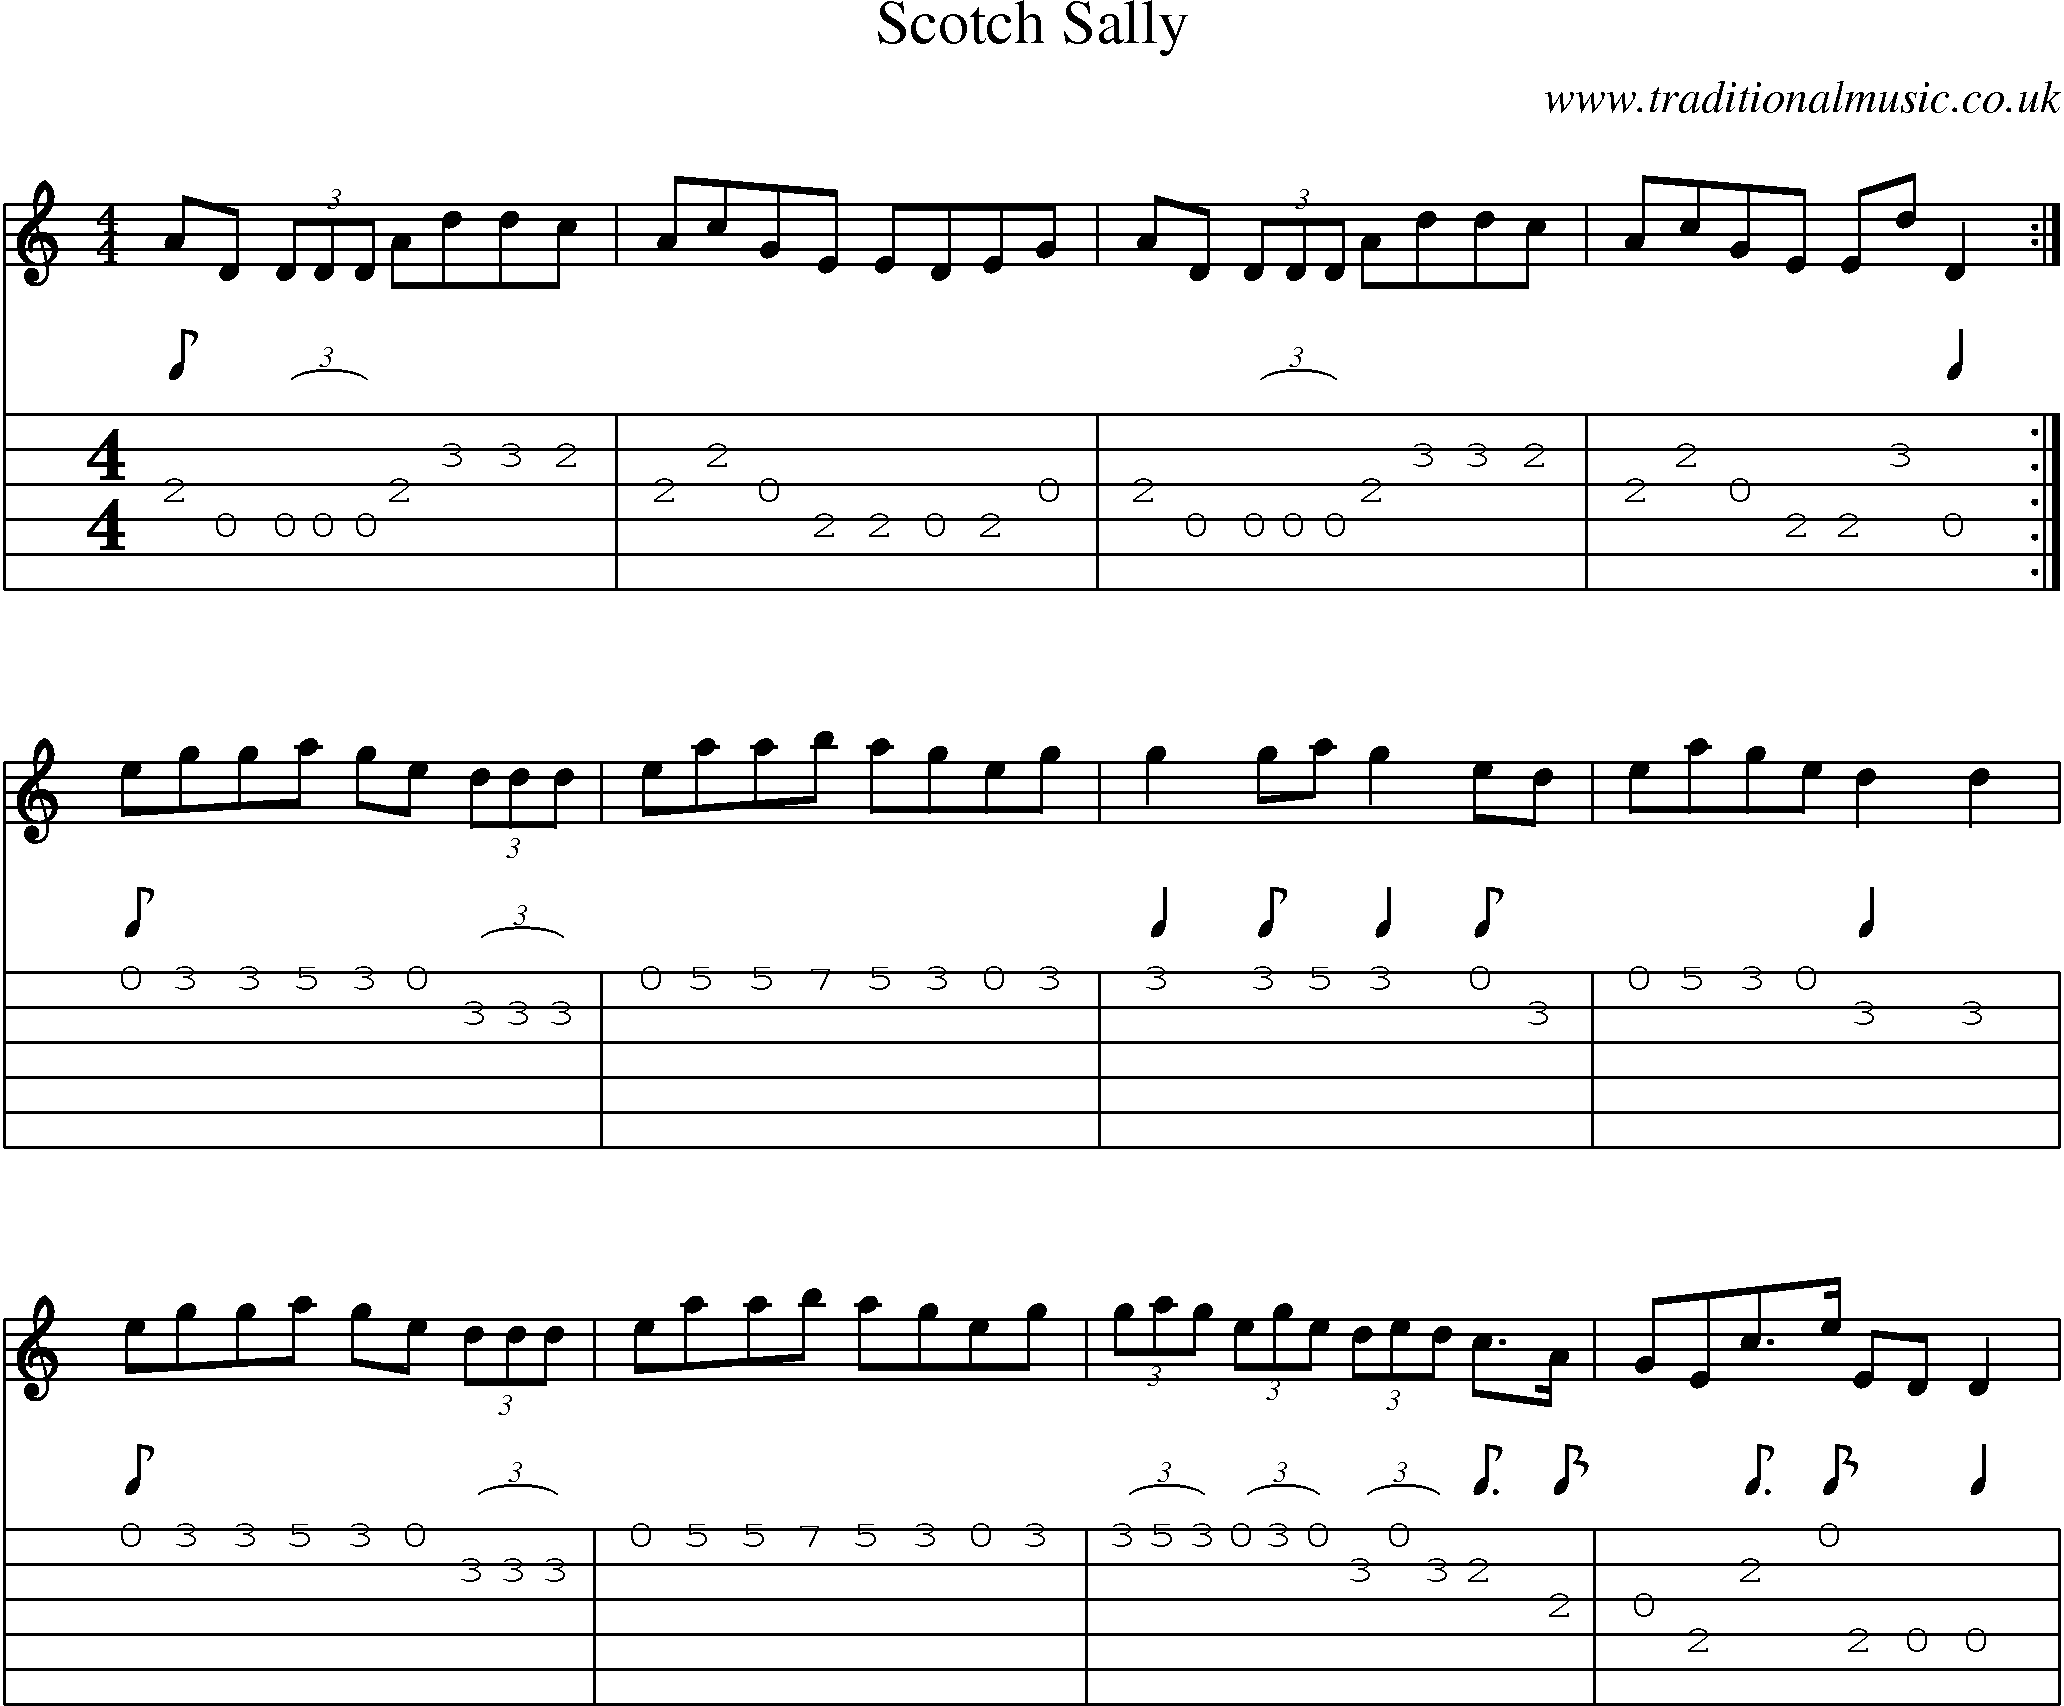 Music Score and Guitar Tabs for Scotch Sally